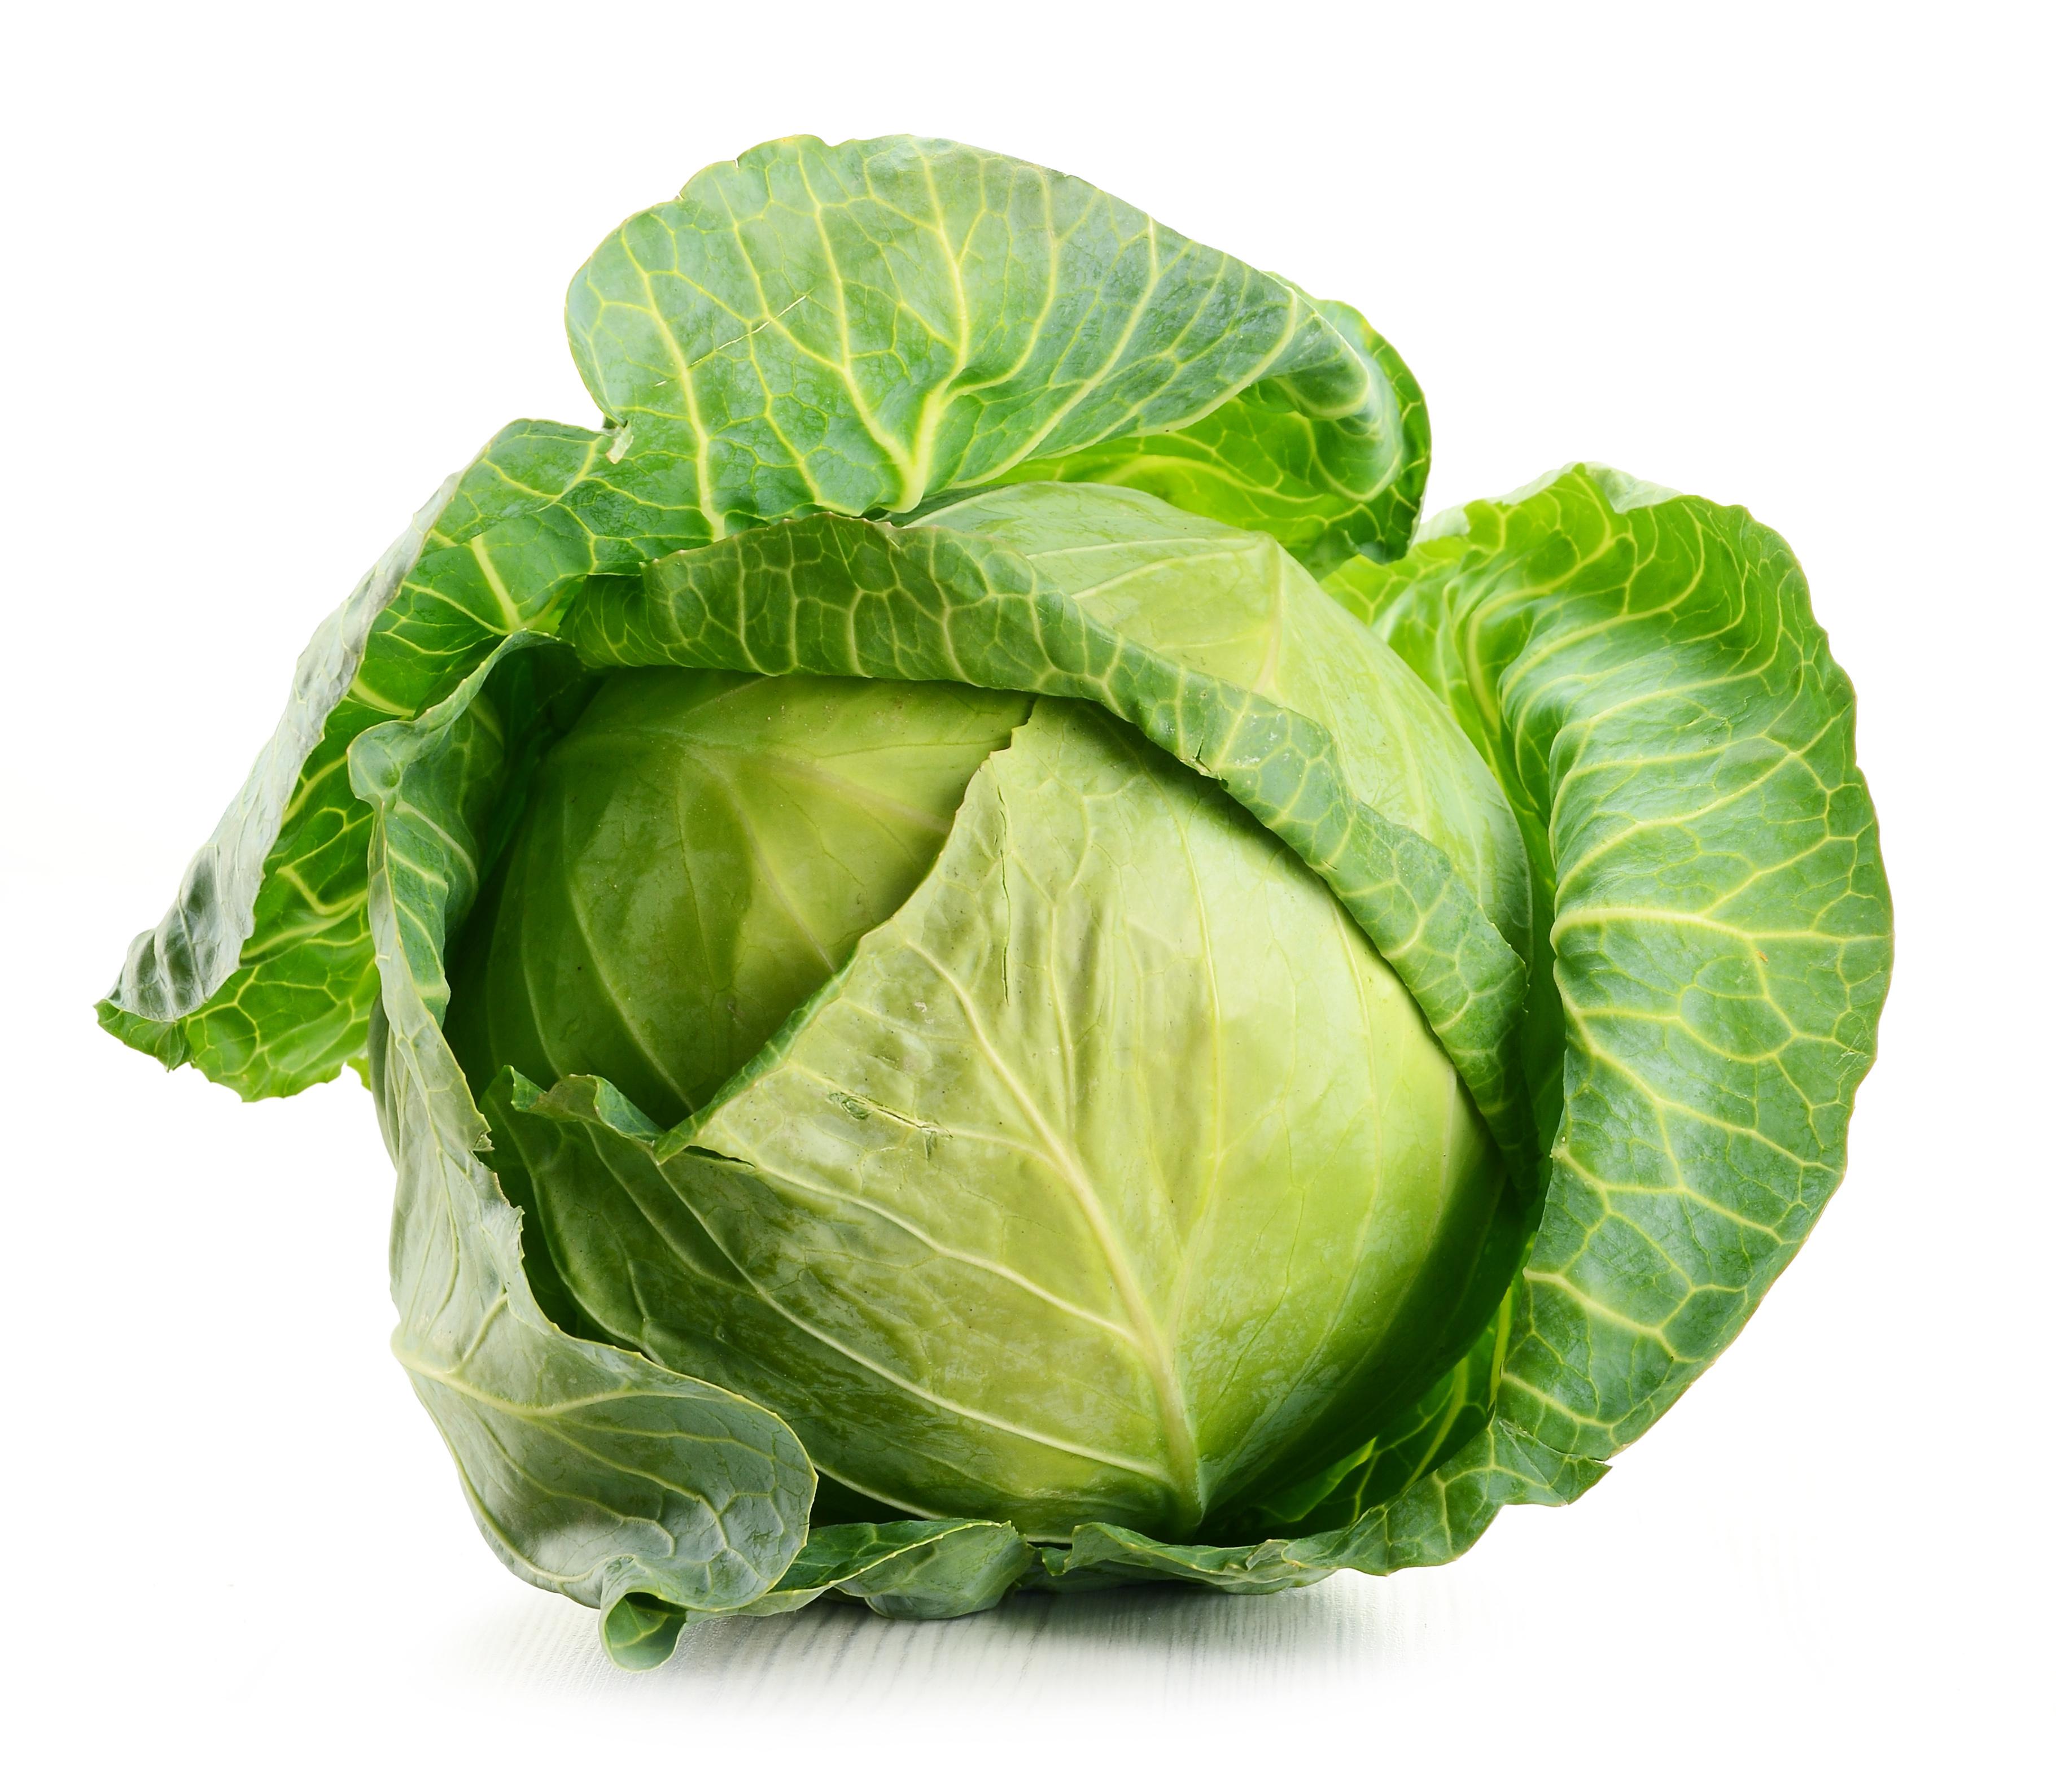 Raw Cabbage Head # 3642x3174. All For Desktop